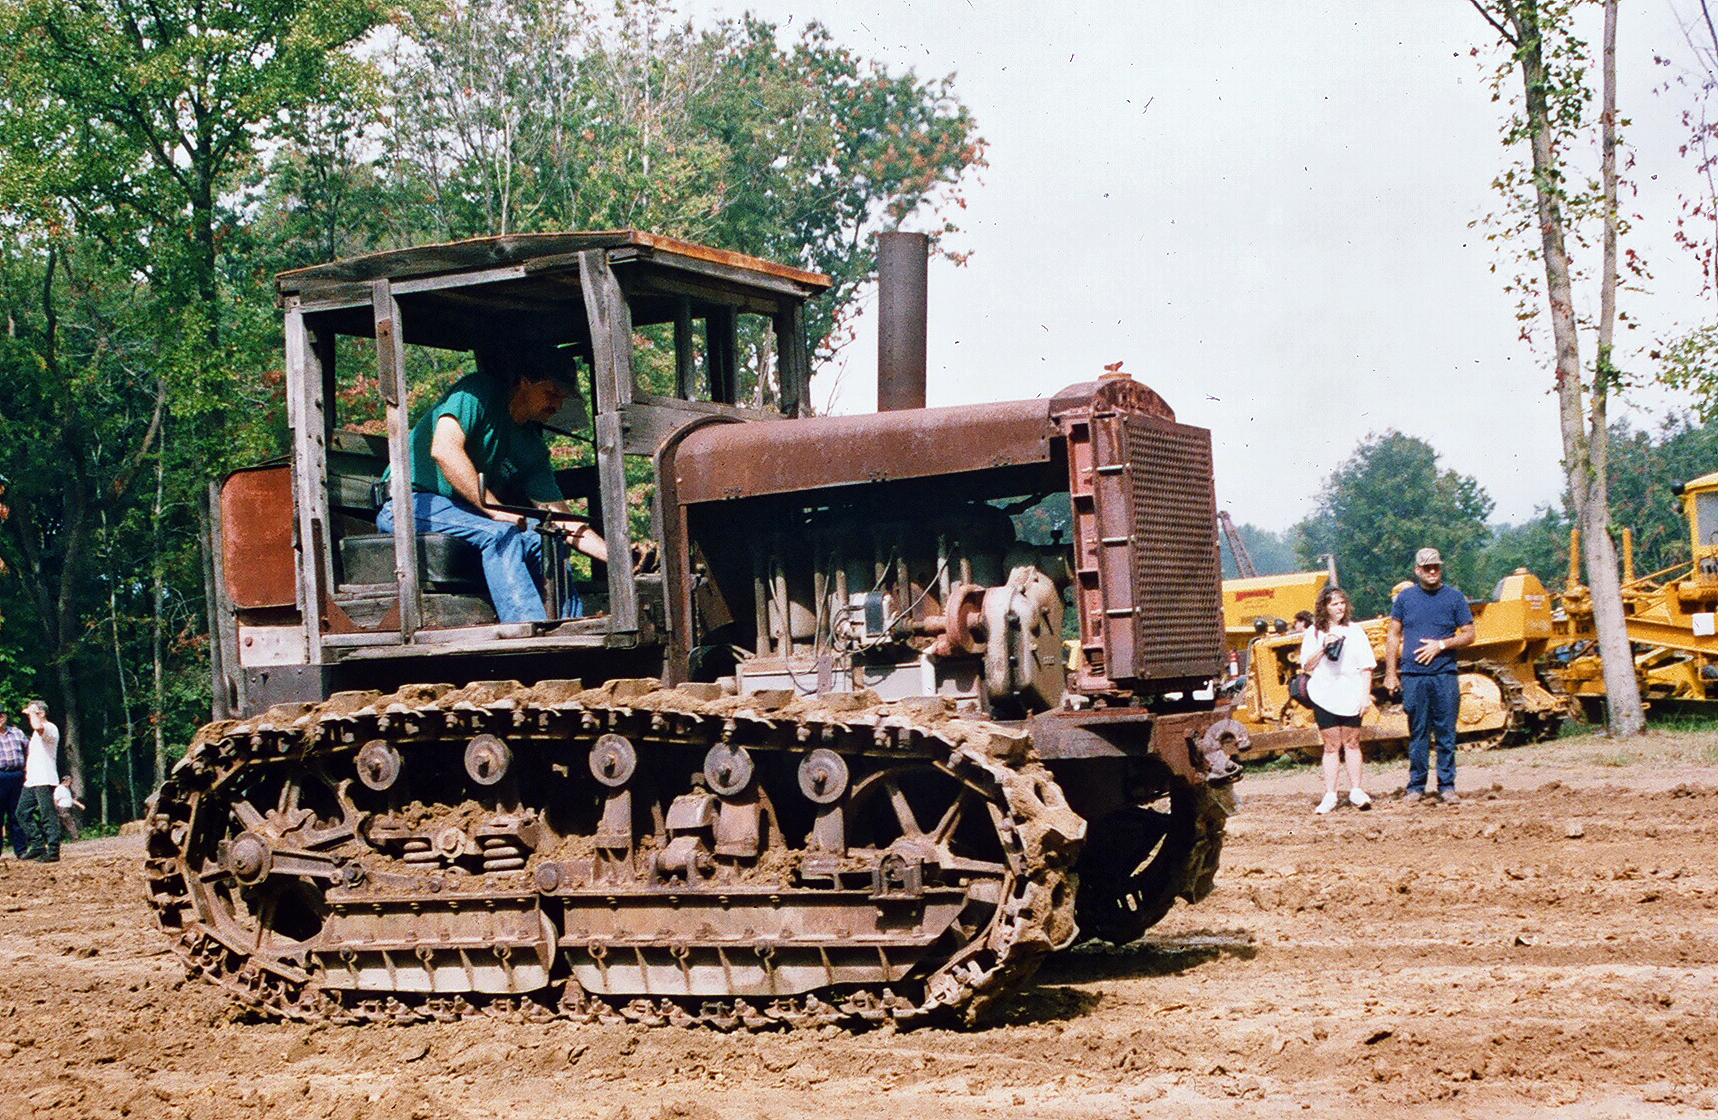 Holt 10-Ton tractor (1920), Brownsville, PA